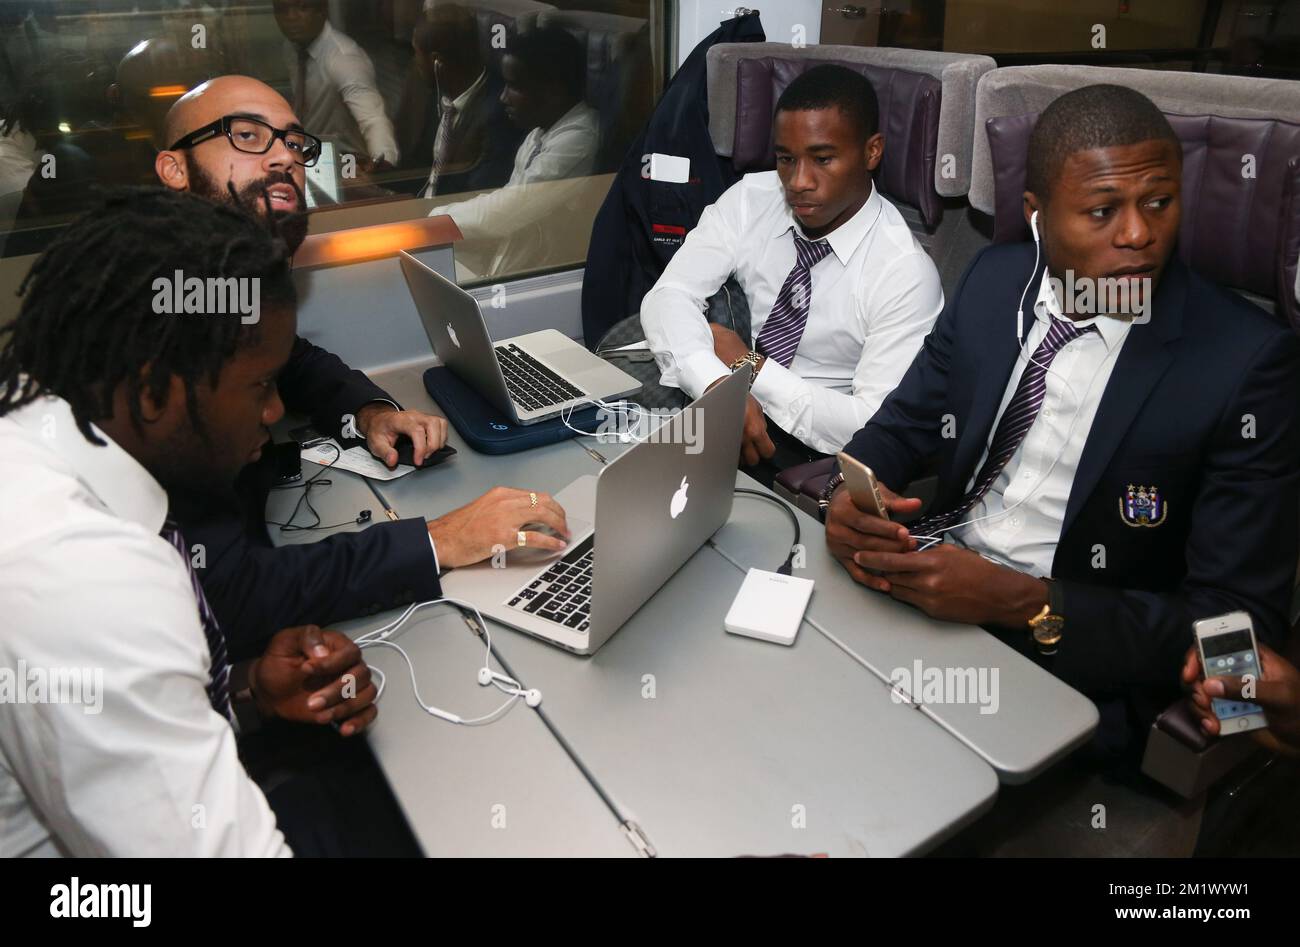 20141103 - BRUSSELS, BELGIUM: (L-R) 42 Anderlecht's Nathan Kabasele, Anderlecht's Anthony Vanden Borre, Anderlecht's Andy Kawaya and Anderlecht's Chancel Mbemba pictured at the departure of Belgian soccer team RSCA Anderlecht in Brussels South station (Midi - Zuid), on the way to England with Eurostar, Monday 03 November 2014. Tomorrow Anderlecht is playing English team Arsenal in the fourth day of the group stage of the UEFA Champions League competition, in the group D. BELGA PHOTO VIRGINIE LEFOUR Stock Photo